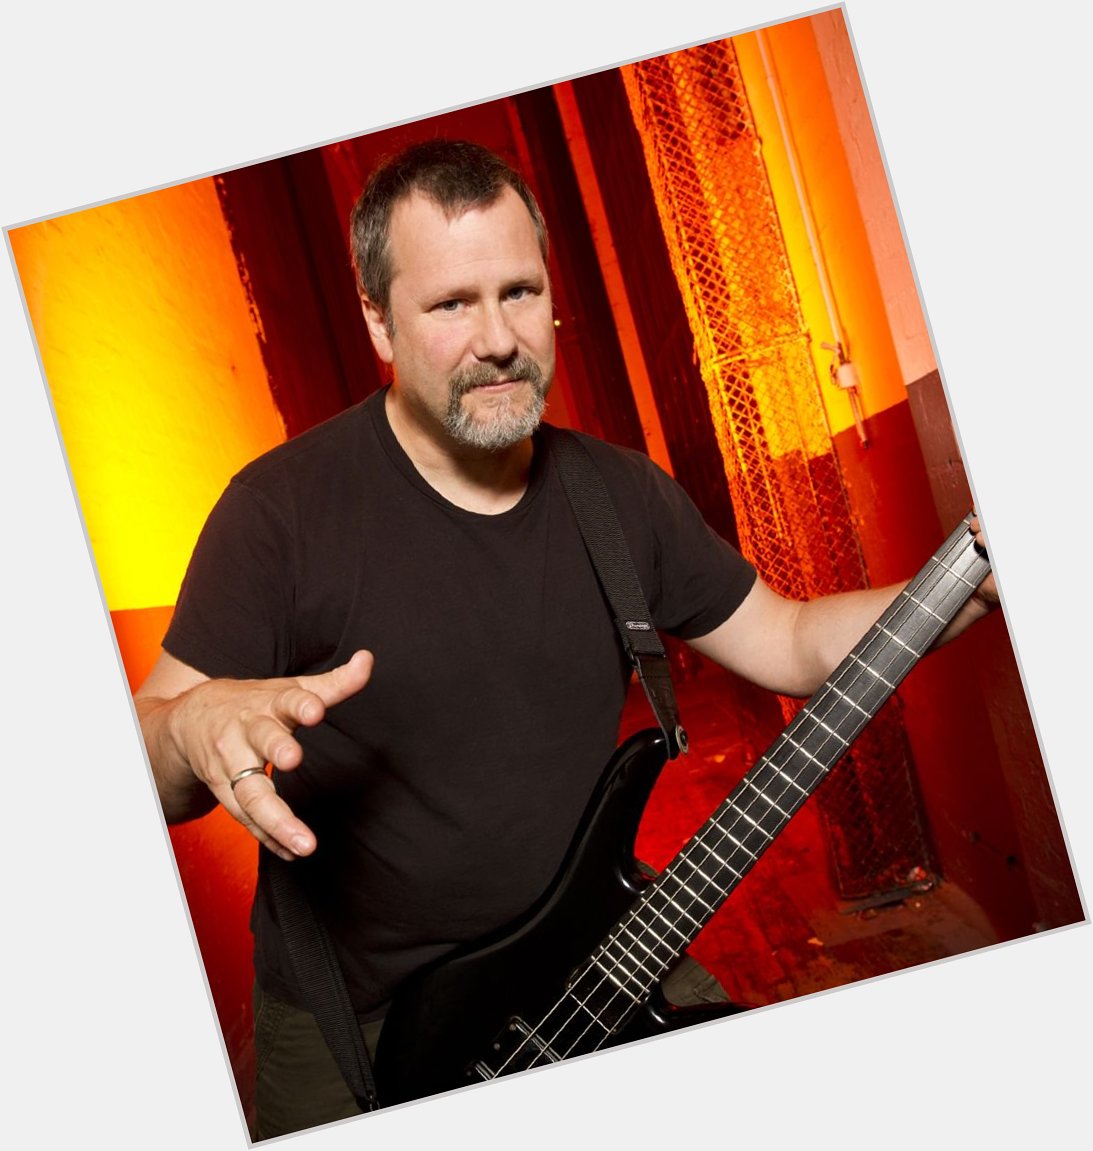 Happy 59 birthday to the amazing Faith No More bassist Billy Gould! 